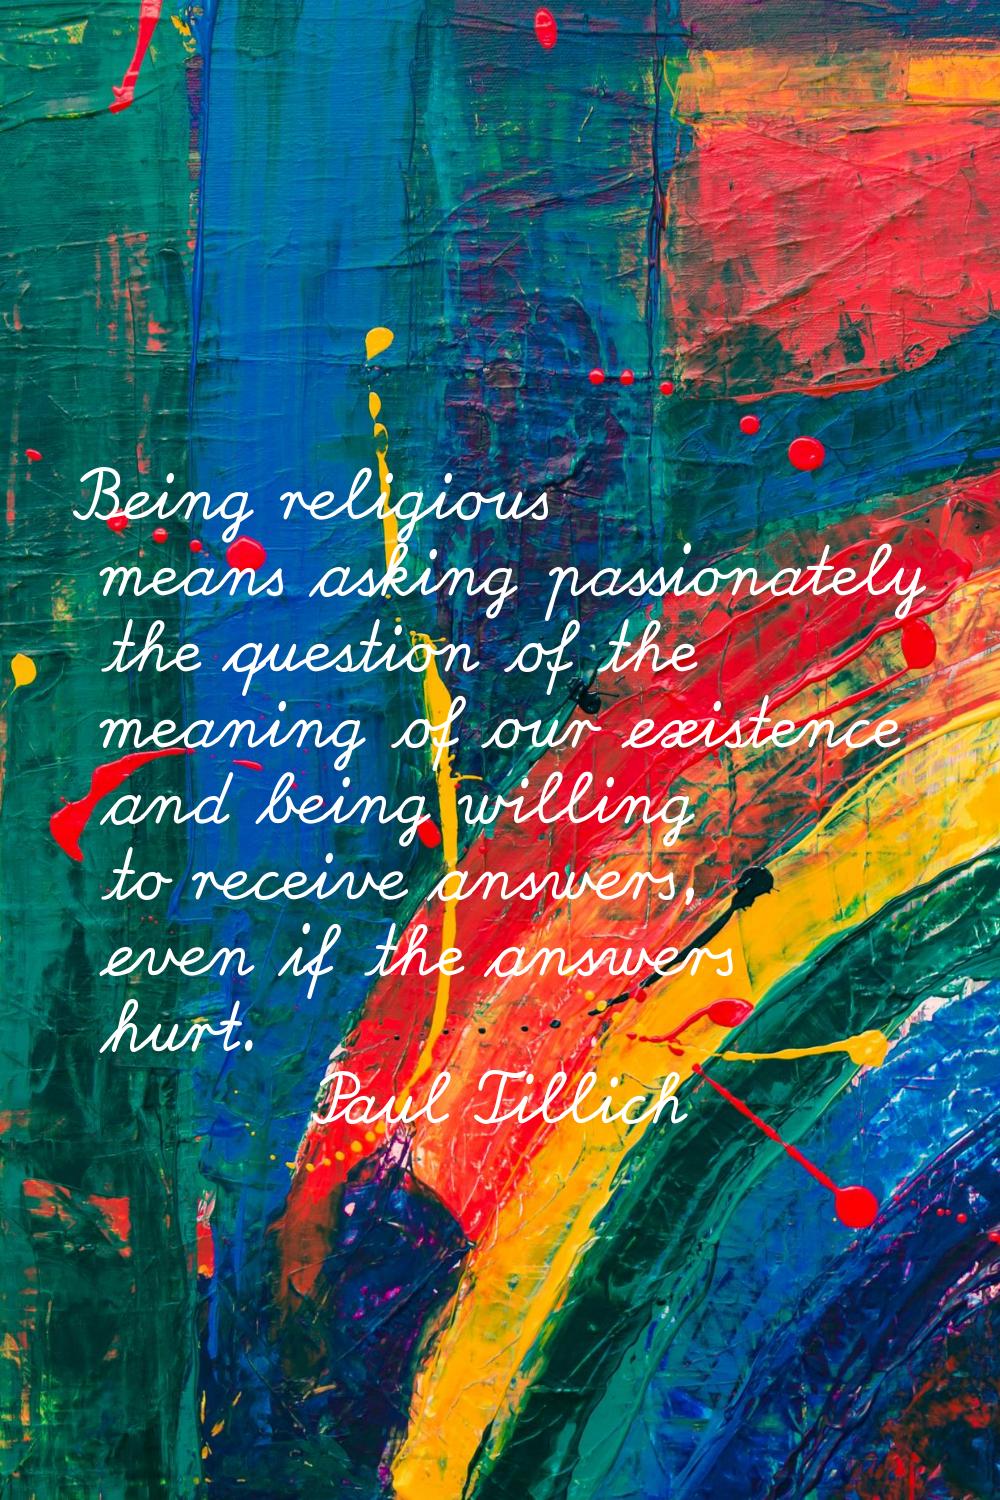 Being religious means asking passionately the question of the meaning of our existence and being wi